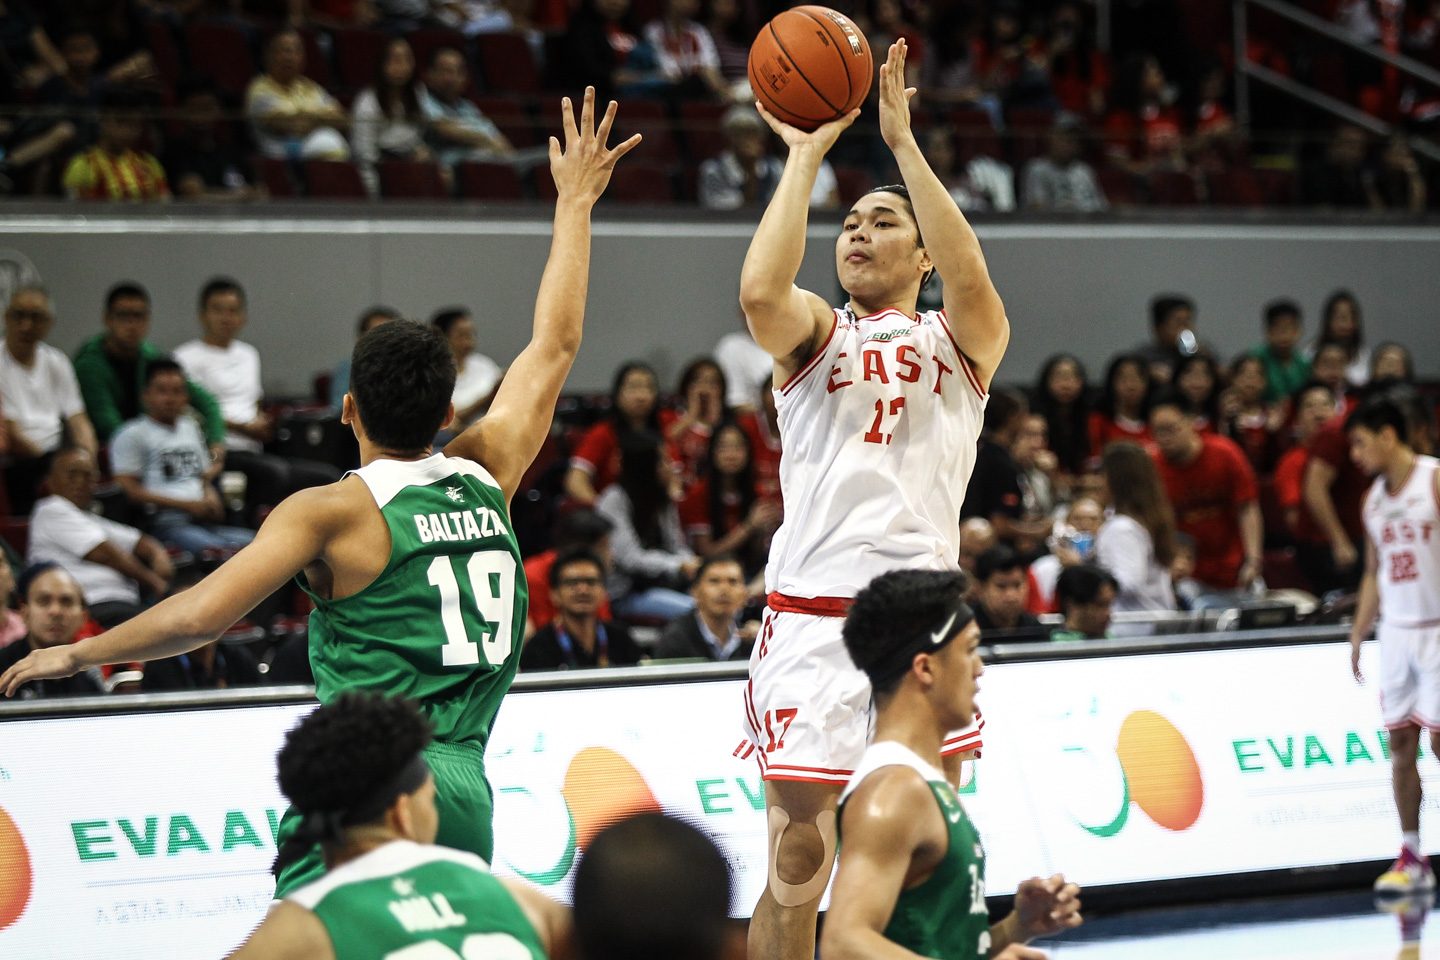 How John Apacible got his second chance in the UAAP